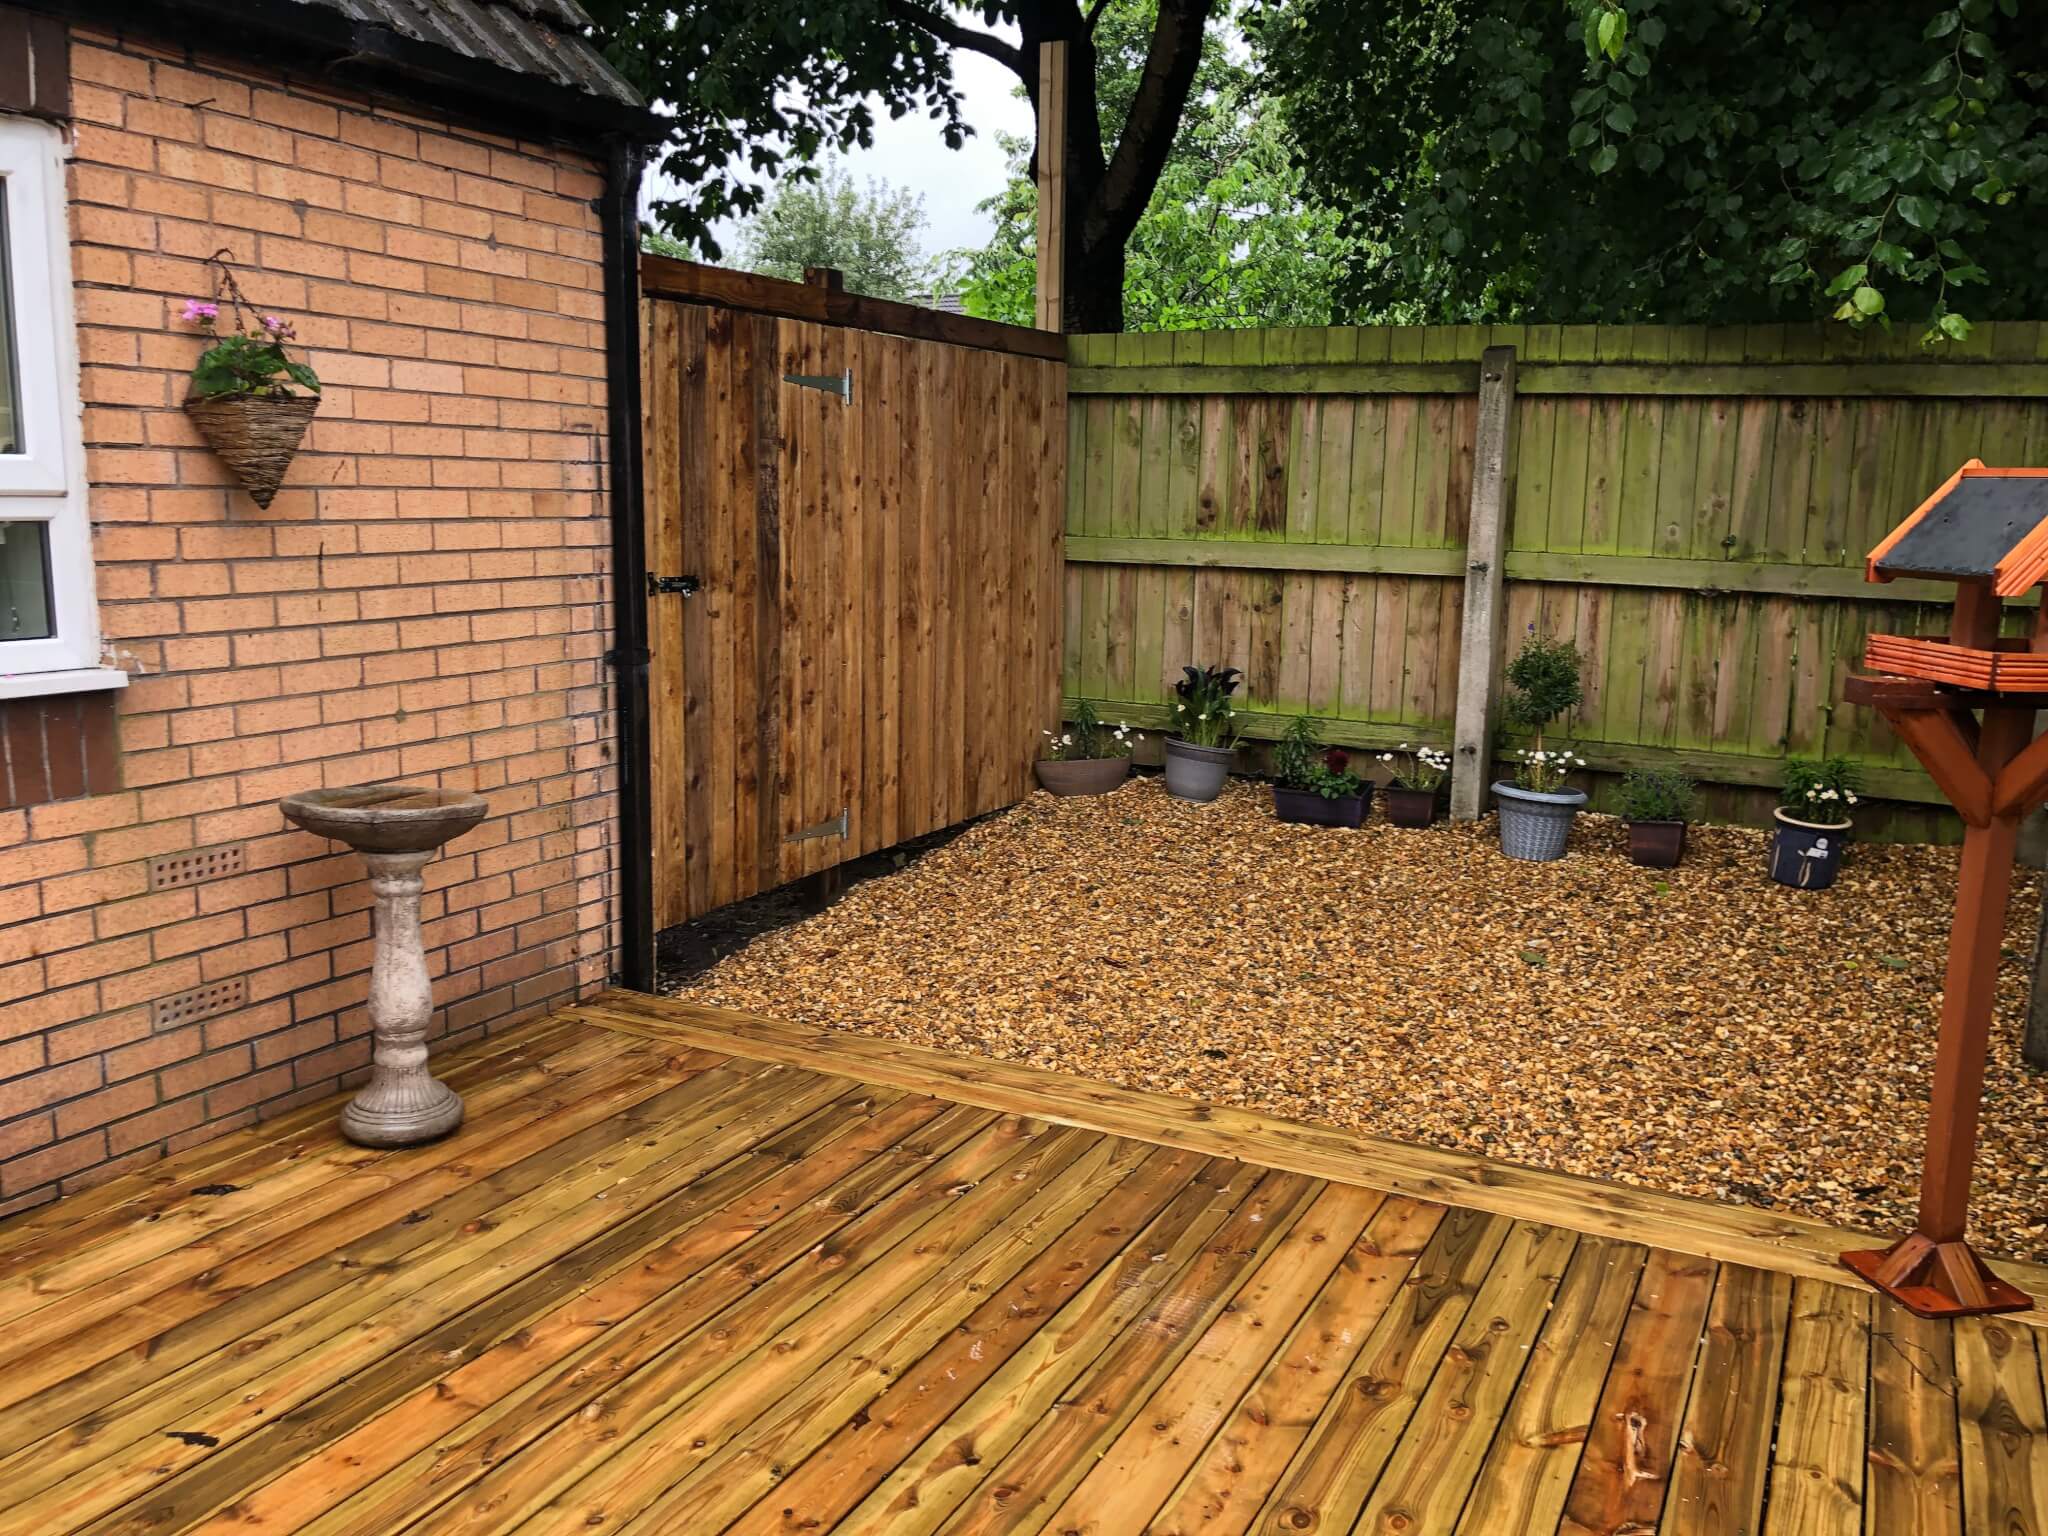 Standard Timber Decking With Gravel And New Gate Dunsford | Abel ...